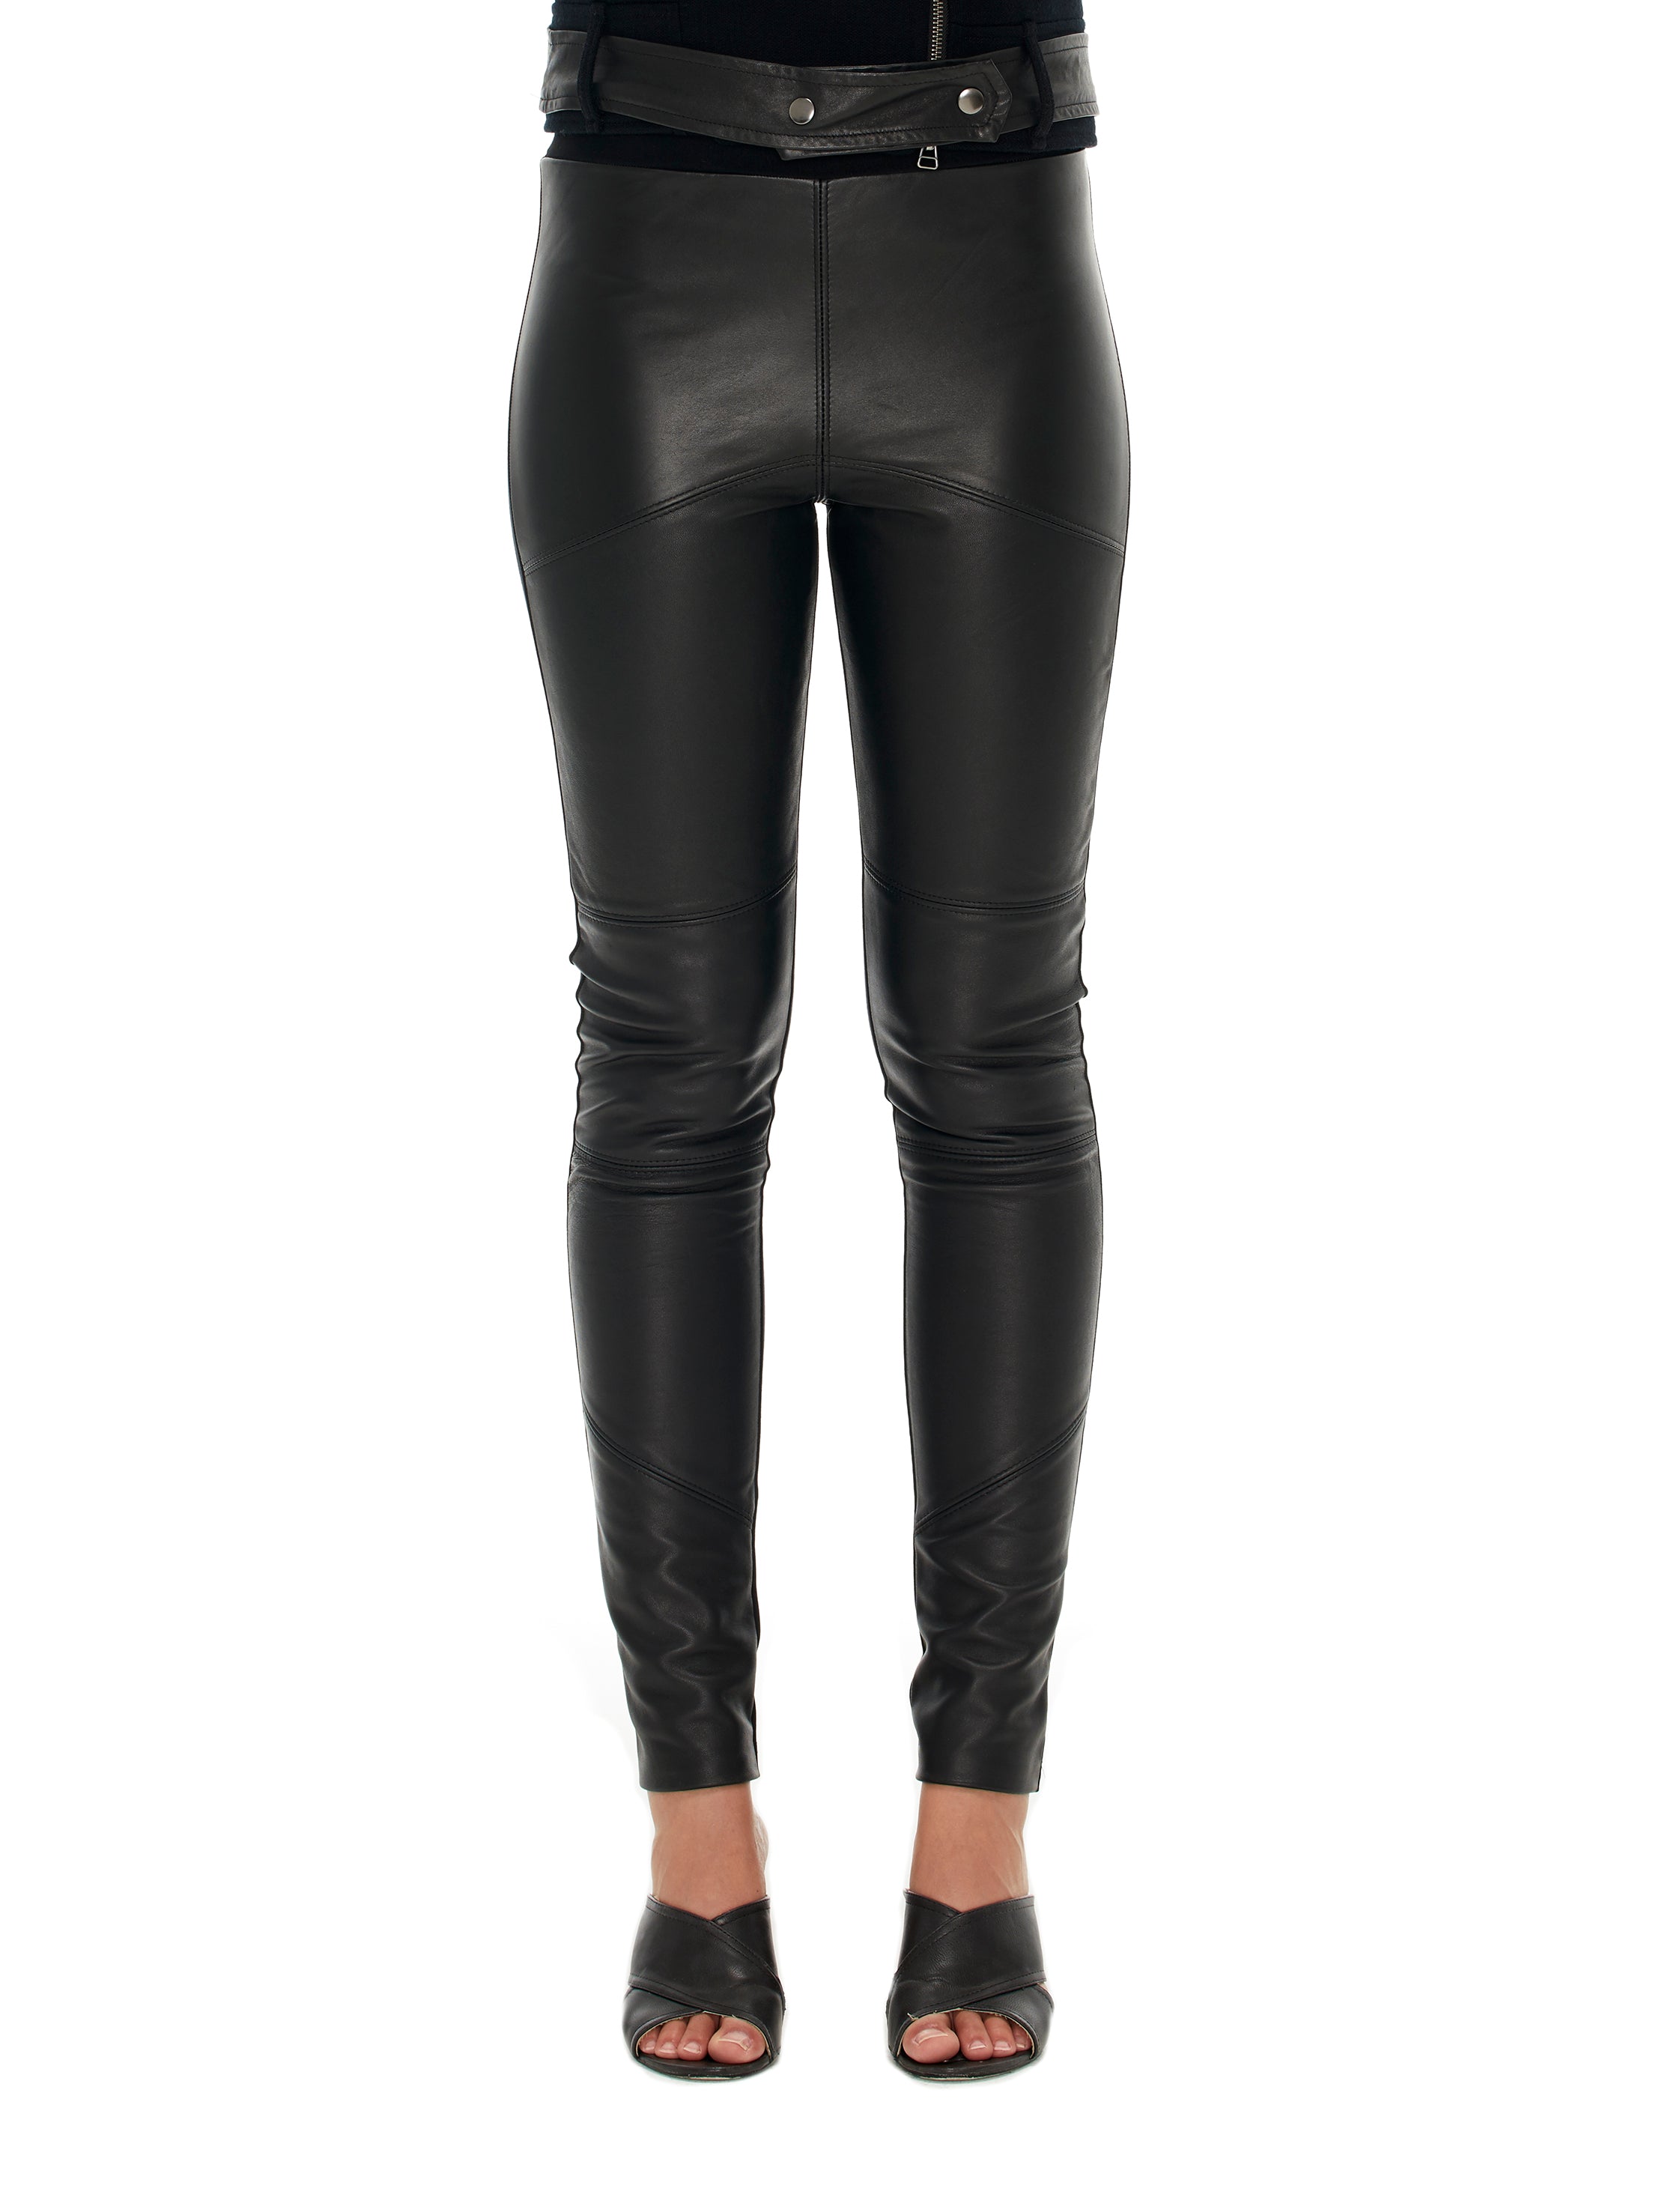 Leather Front Paneled Pant (Charcoal added)